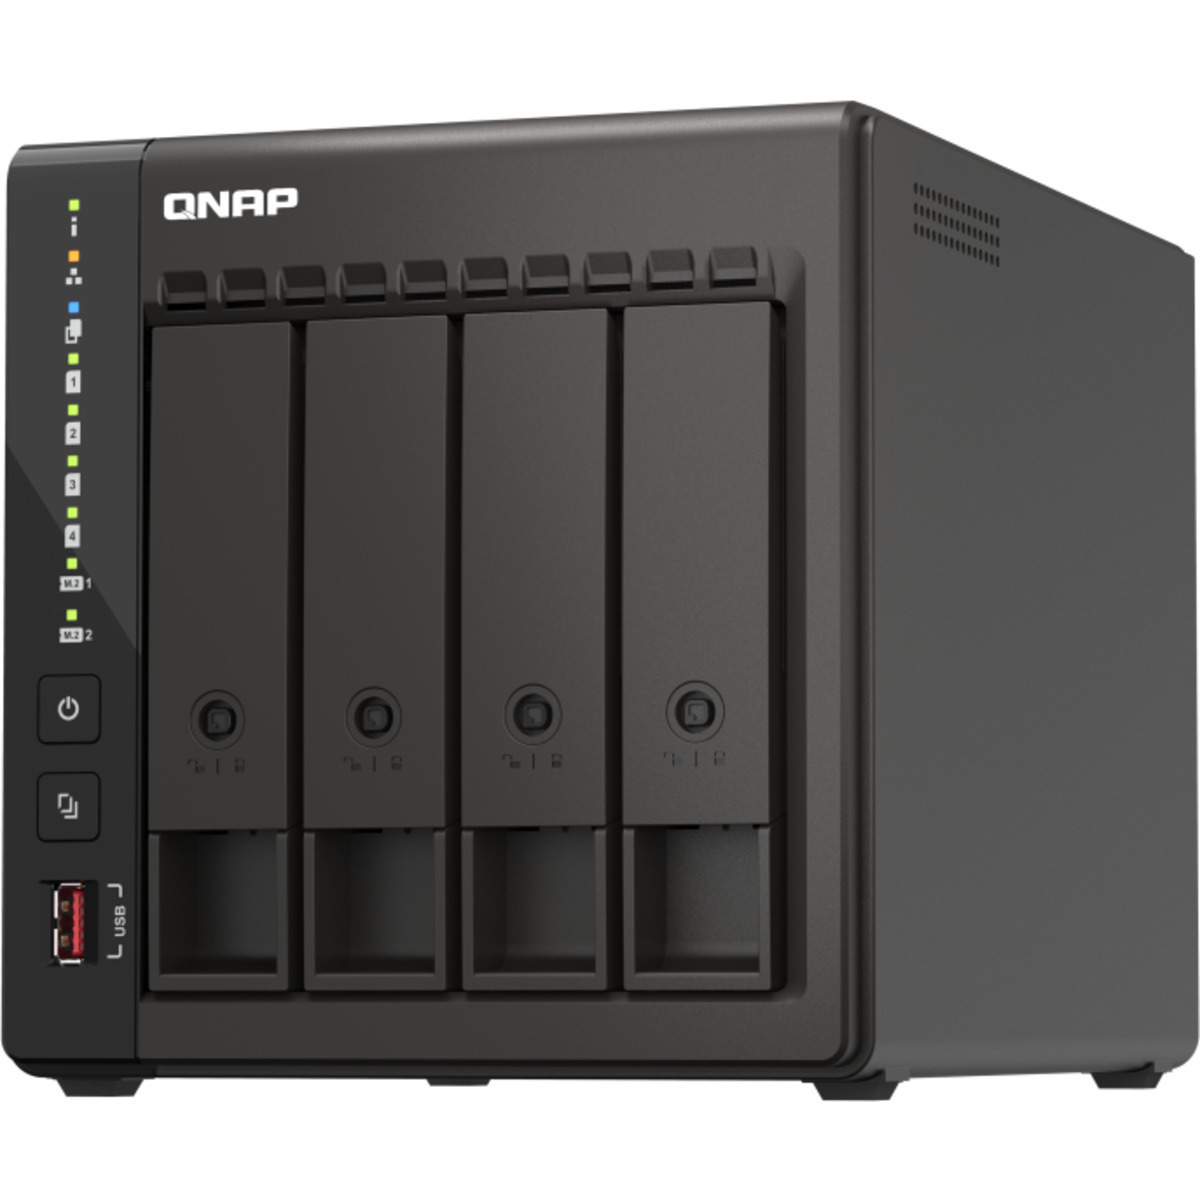 QNAP TS-453E 24tb 4-Bay Desktop Multimedia / Power User / Business NAS - Network Attached Storage Device 3x8tb Western Digital Red Plus WD80EFPX 3.5 7200rpm SATA 6Gb/s HDD NAS Class Drives Installed - Burn-In Tested TS-453E